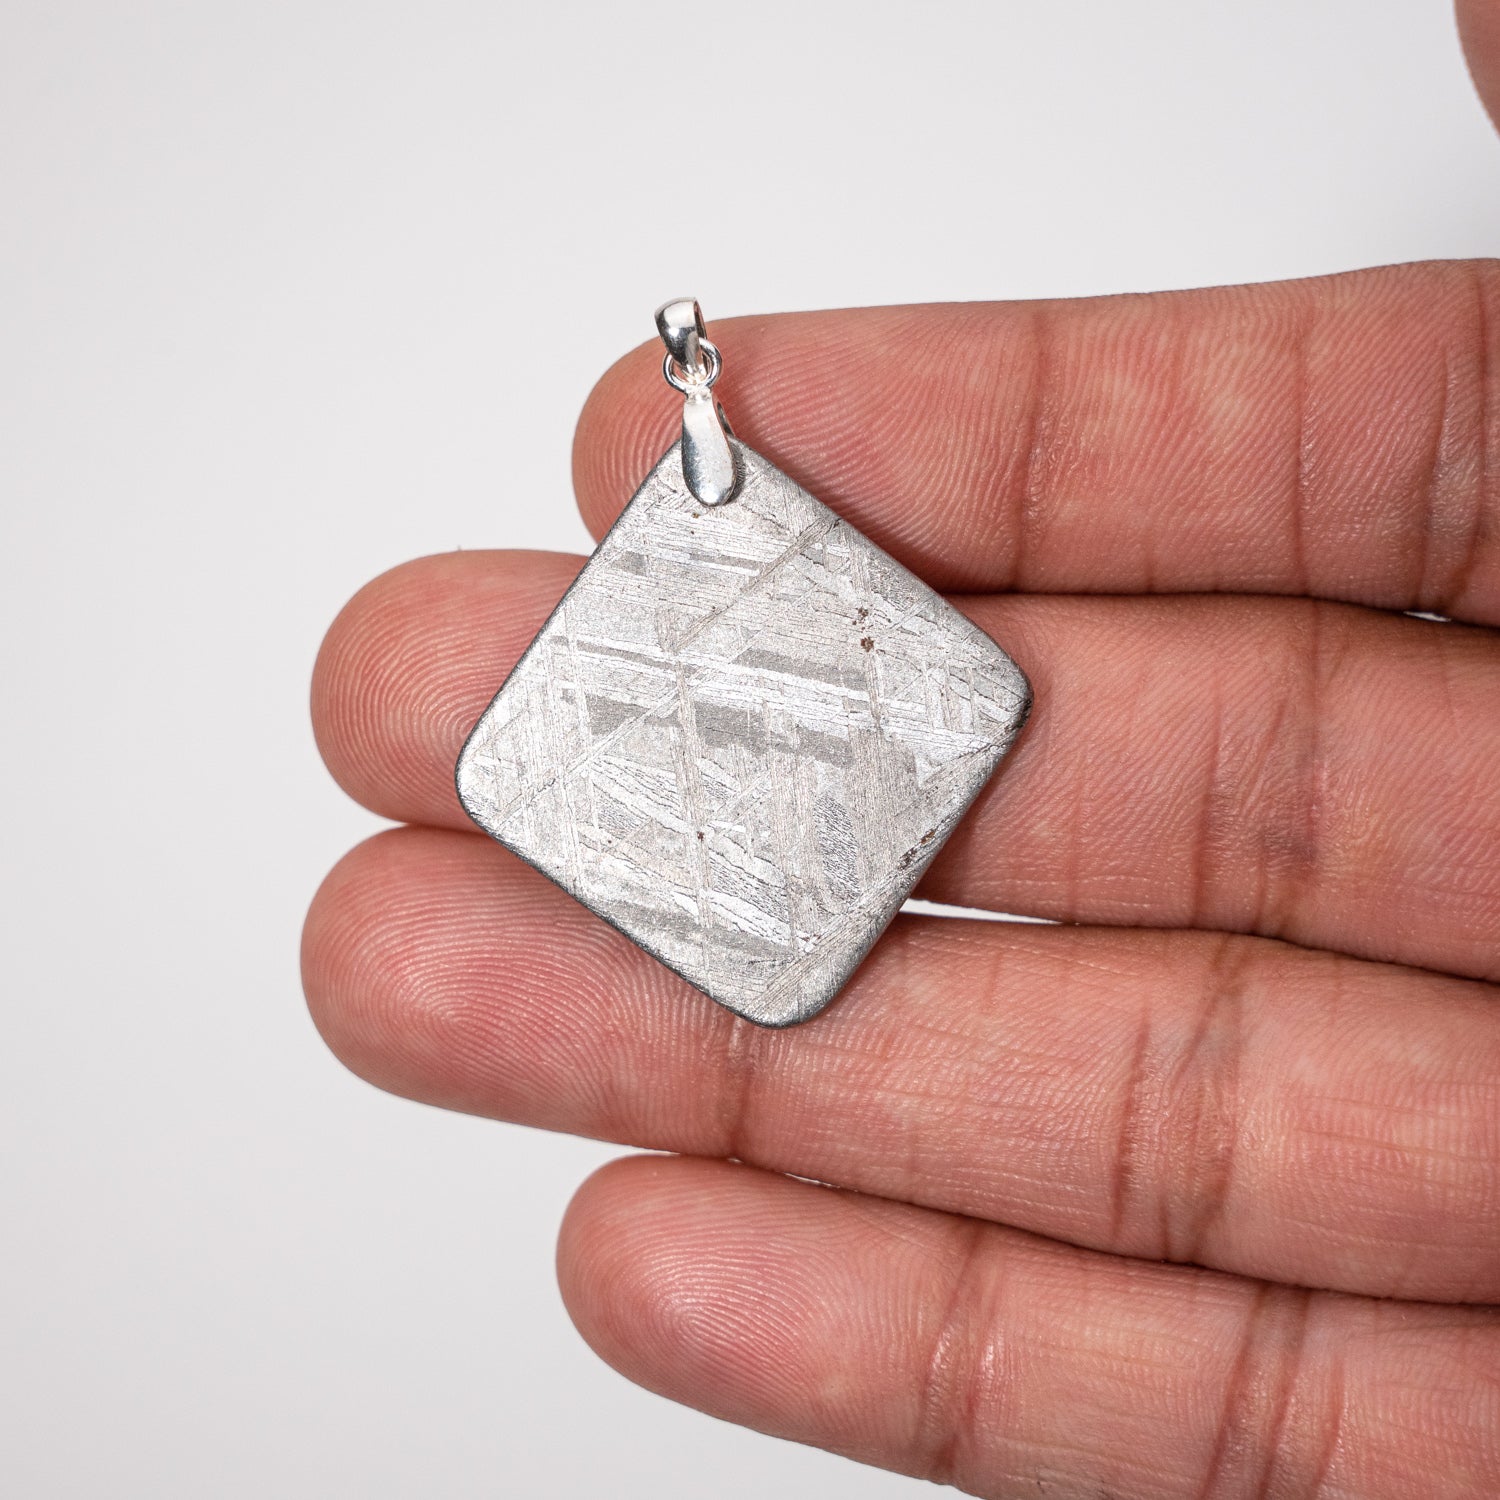 Polished Seymchan Meteorite pendant (11 grams) with 18" Sterling Silver Chain